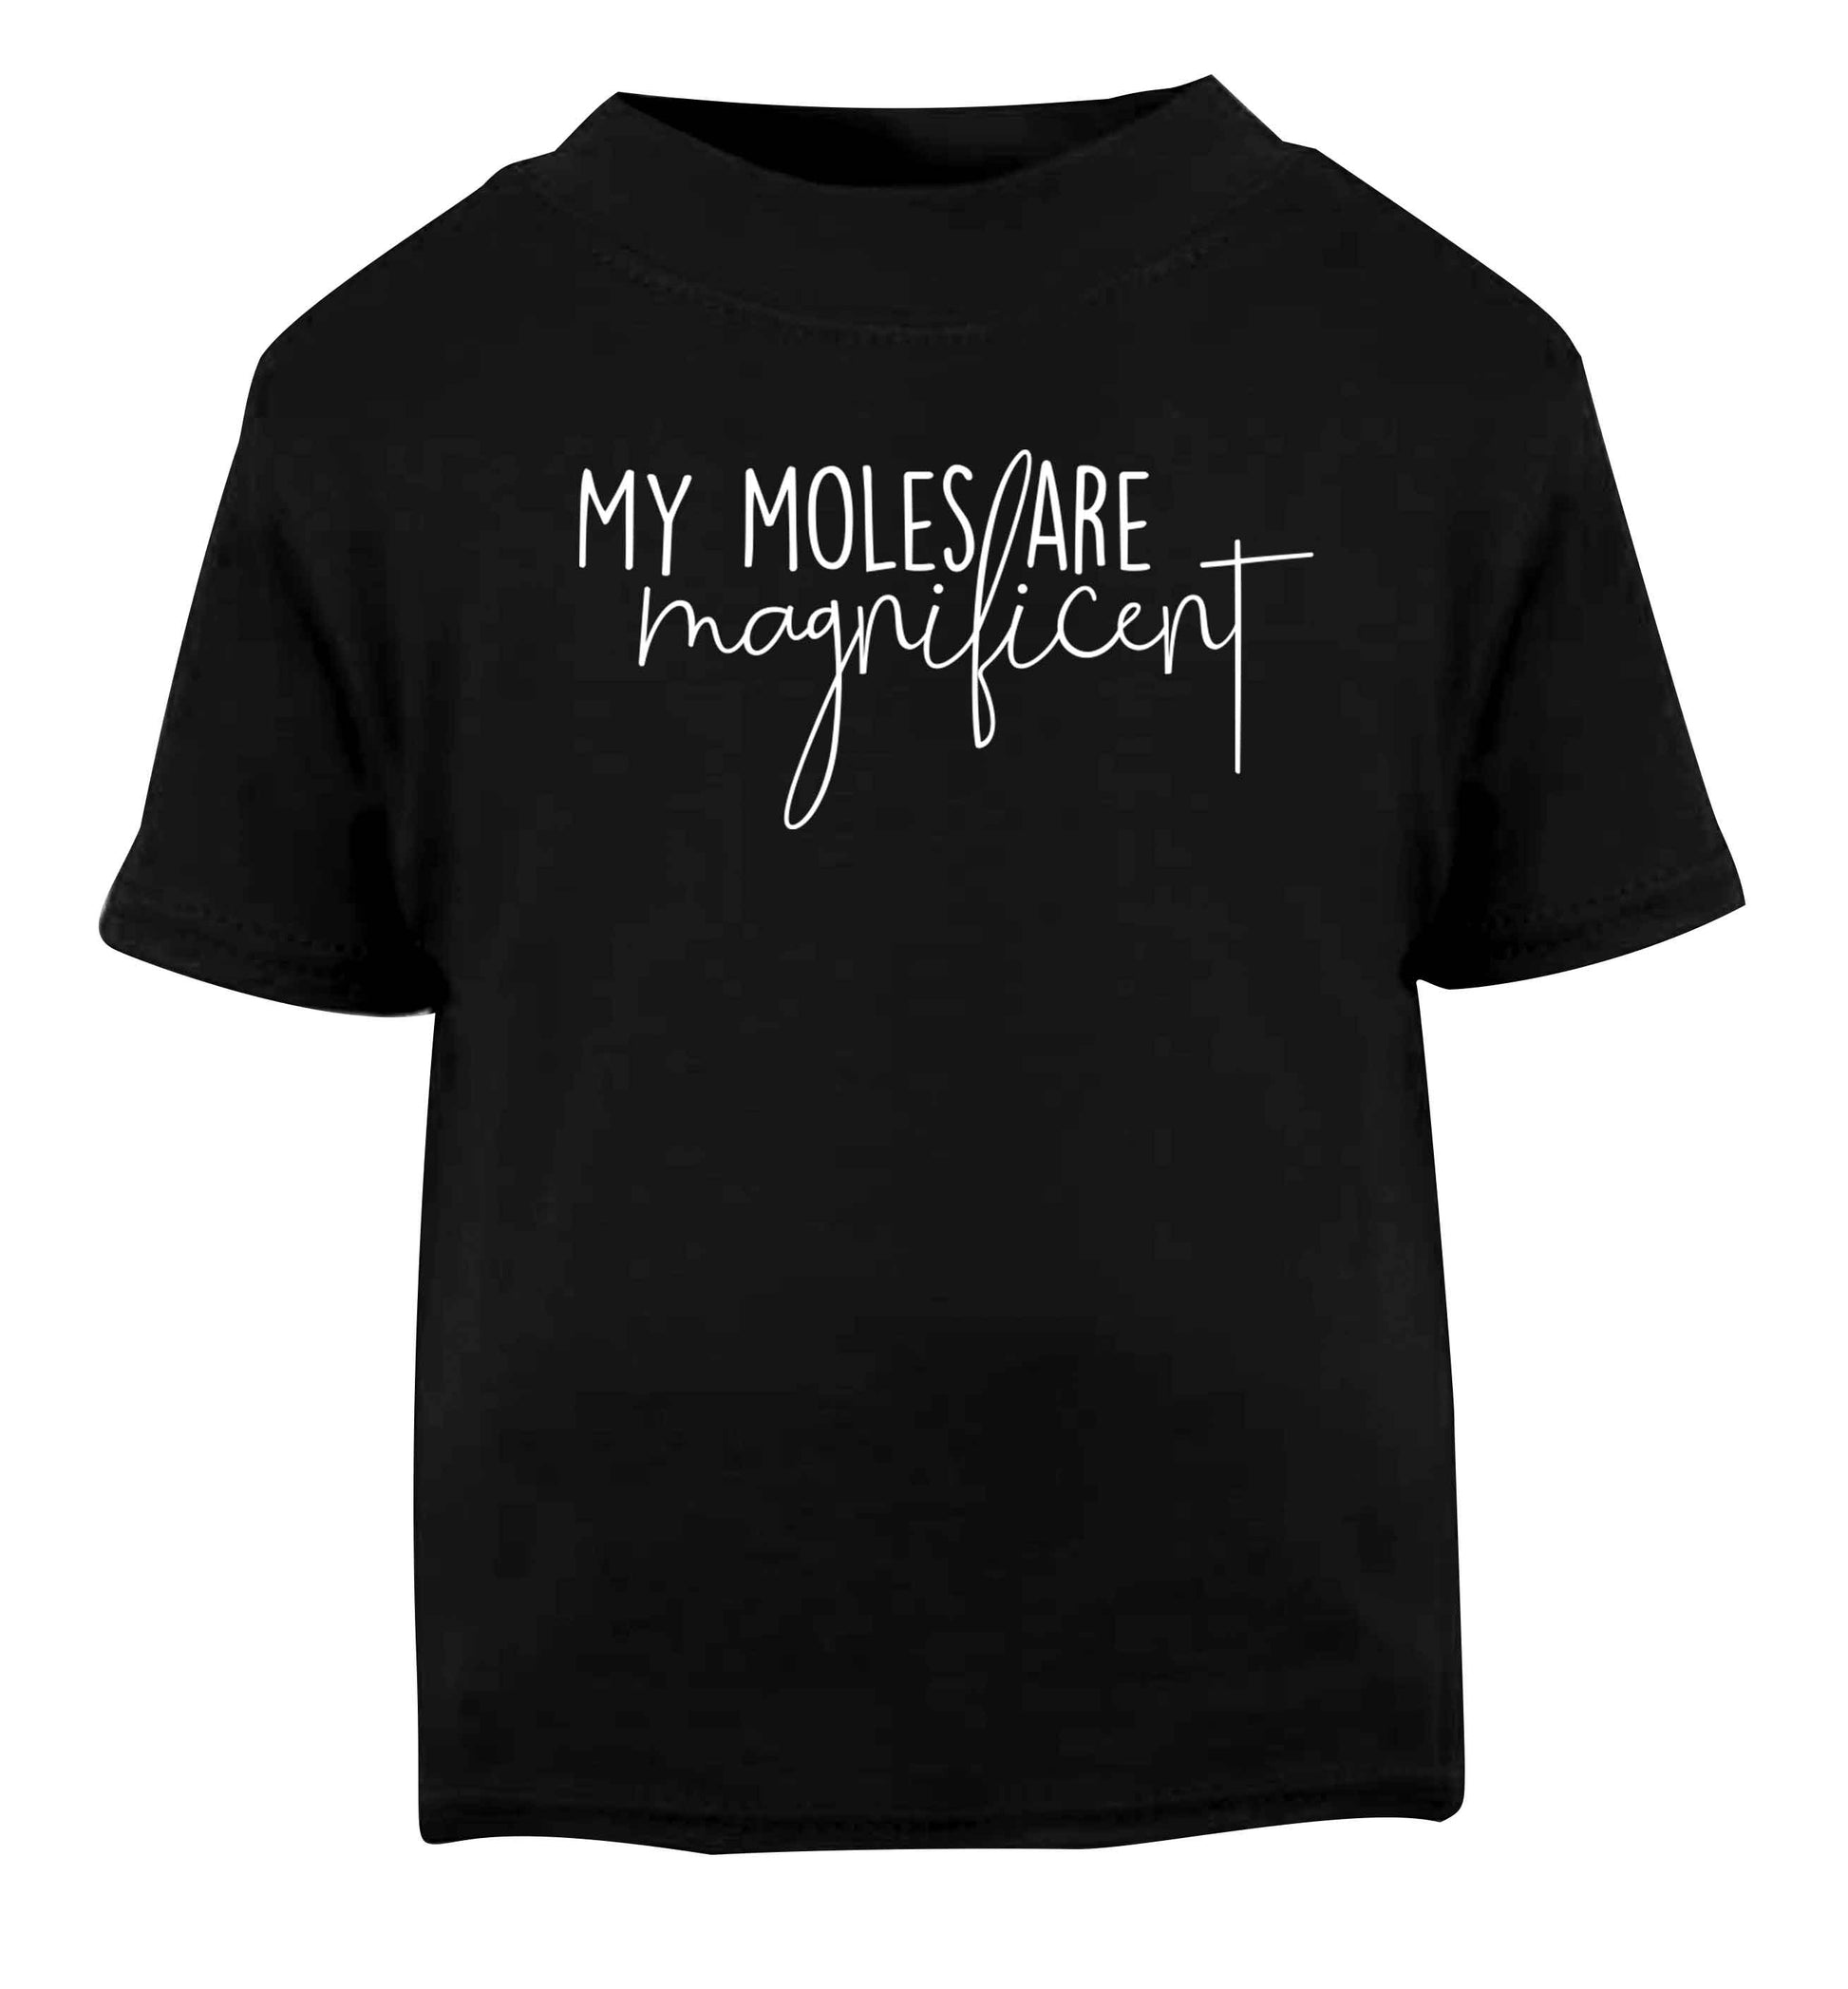 My moles are magnificent Black baby toddler Tshirt 2 years